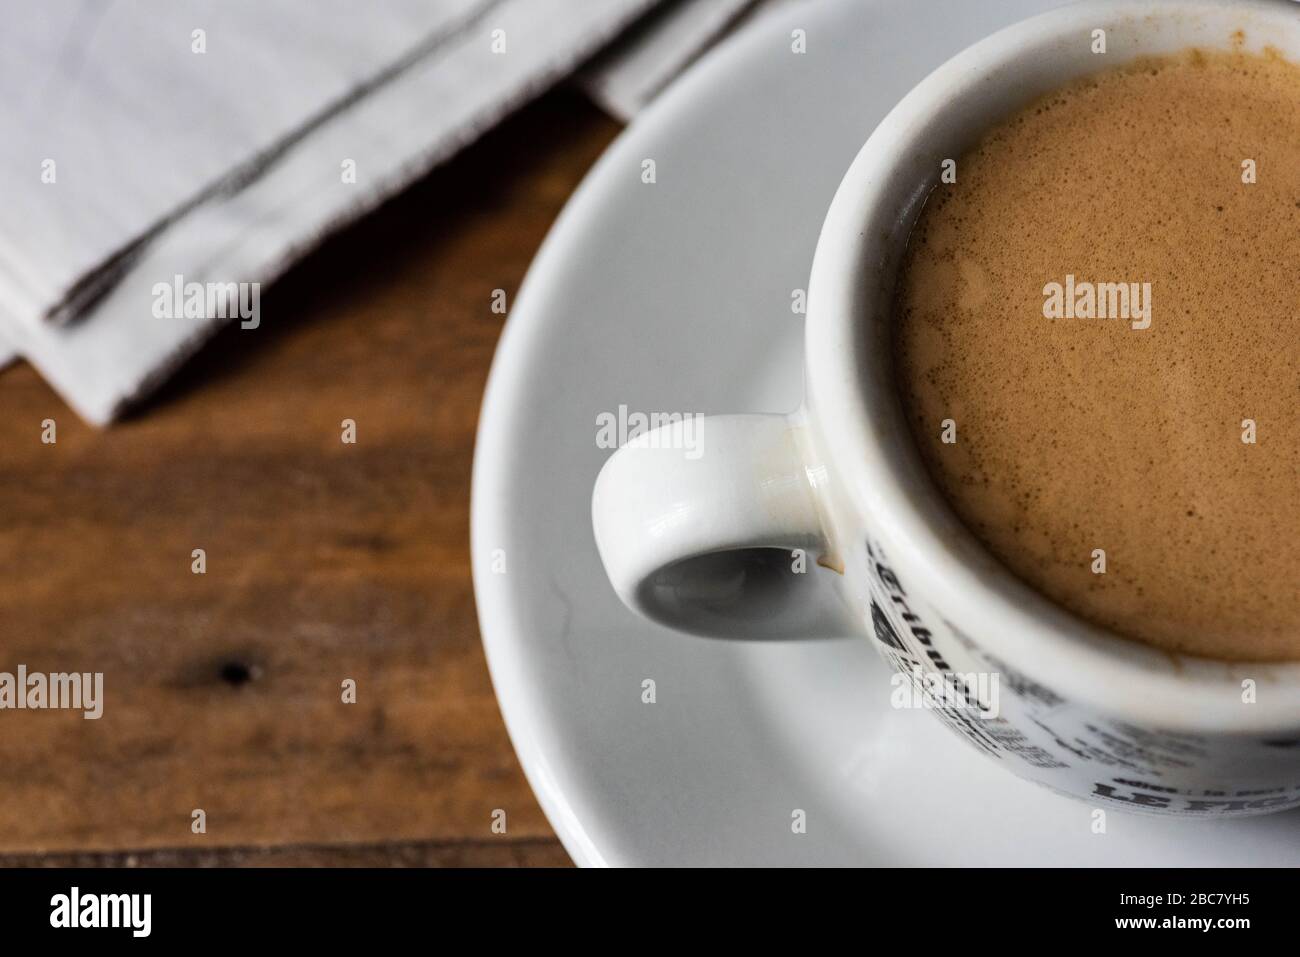 cup of espresso coffee on a wood table Stock Photo